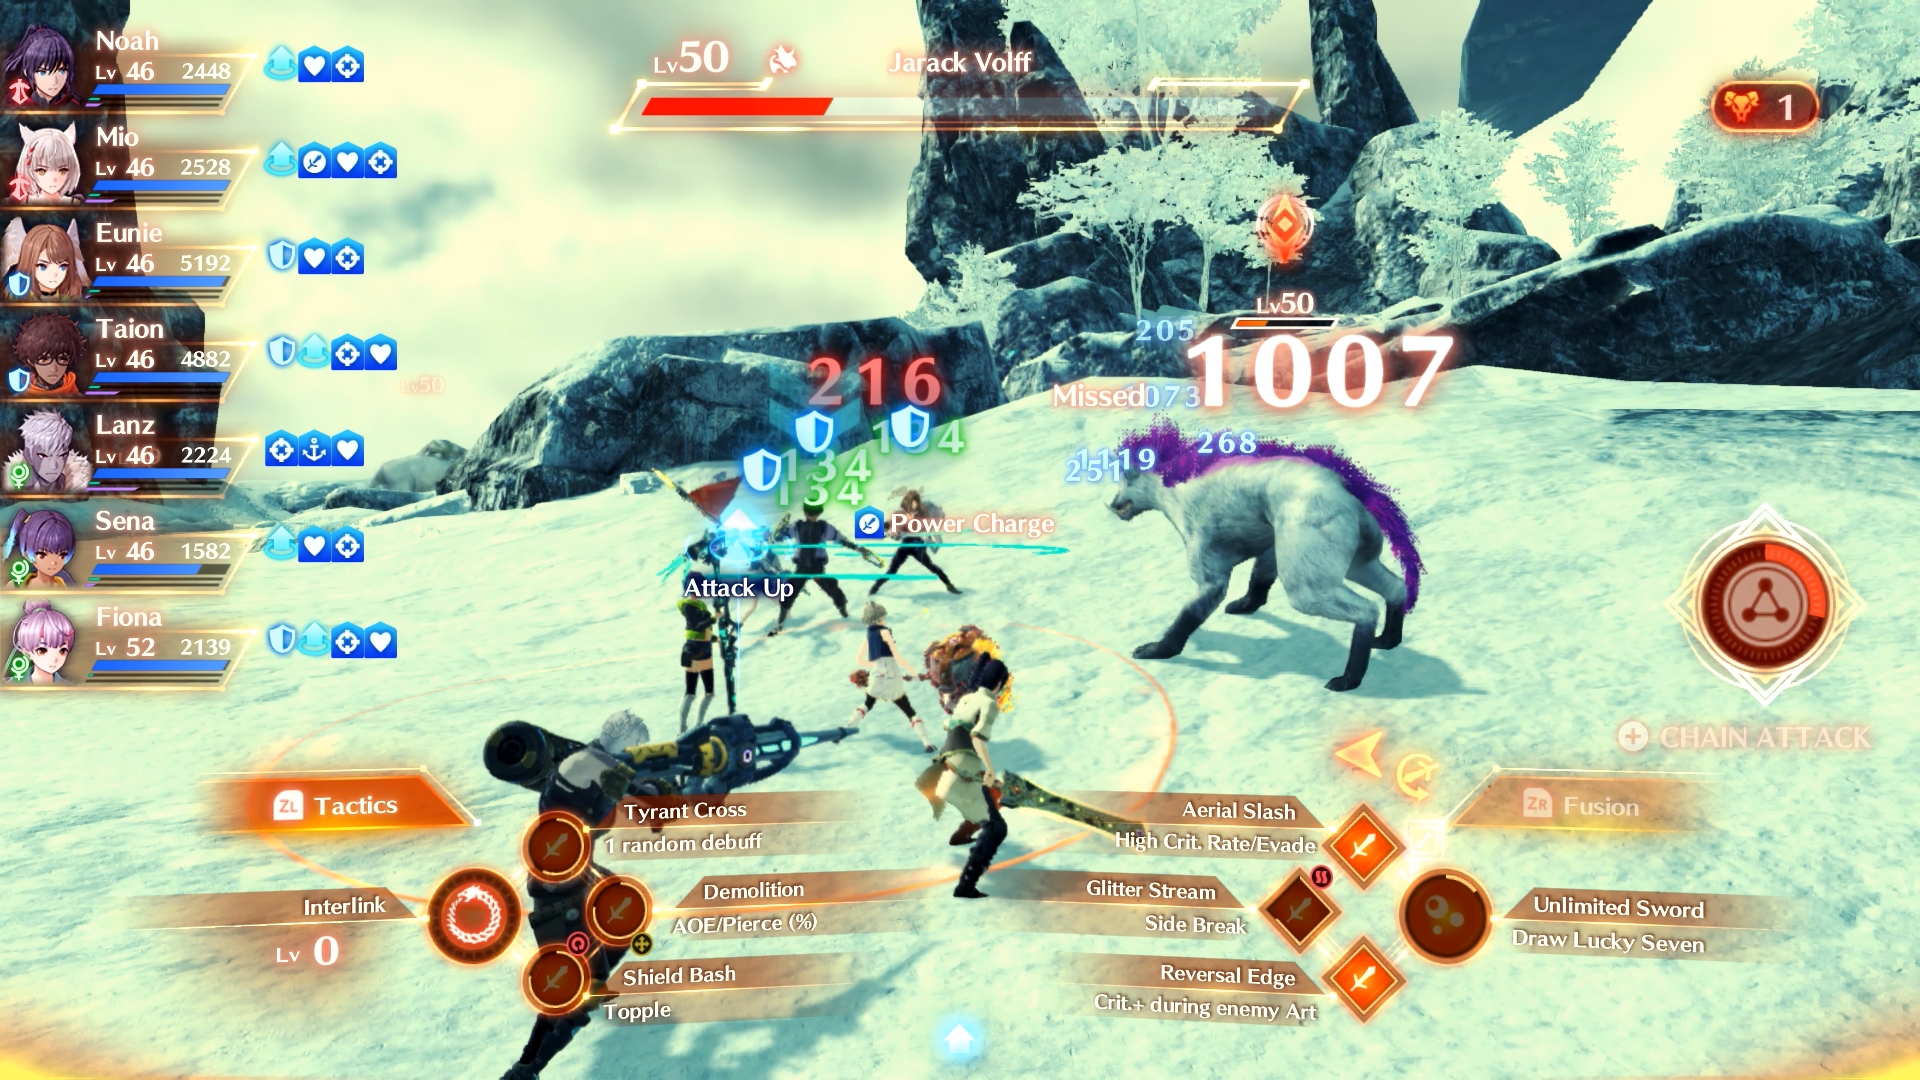 Xenoblade Chronicles 3 review: Monolith Soft's best story yet - Polygon